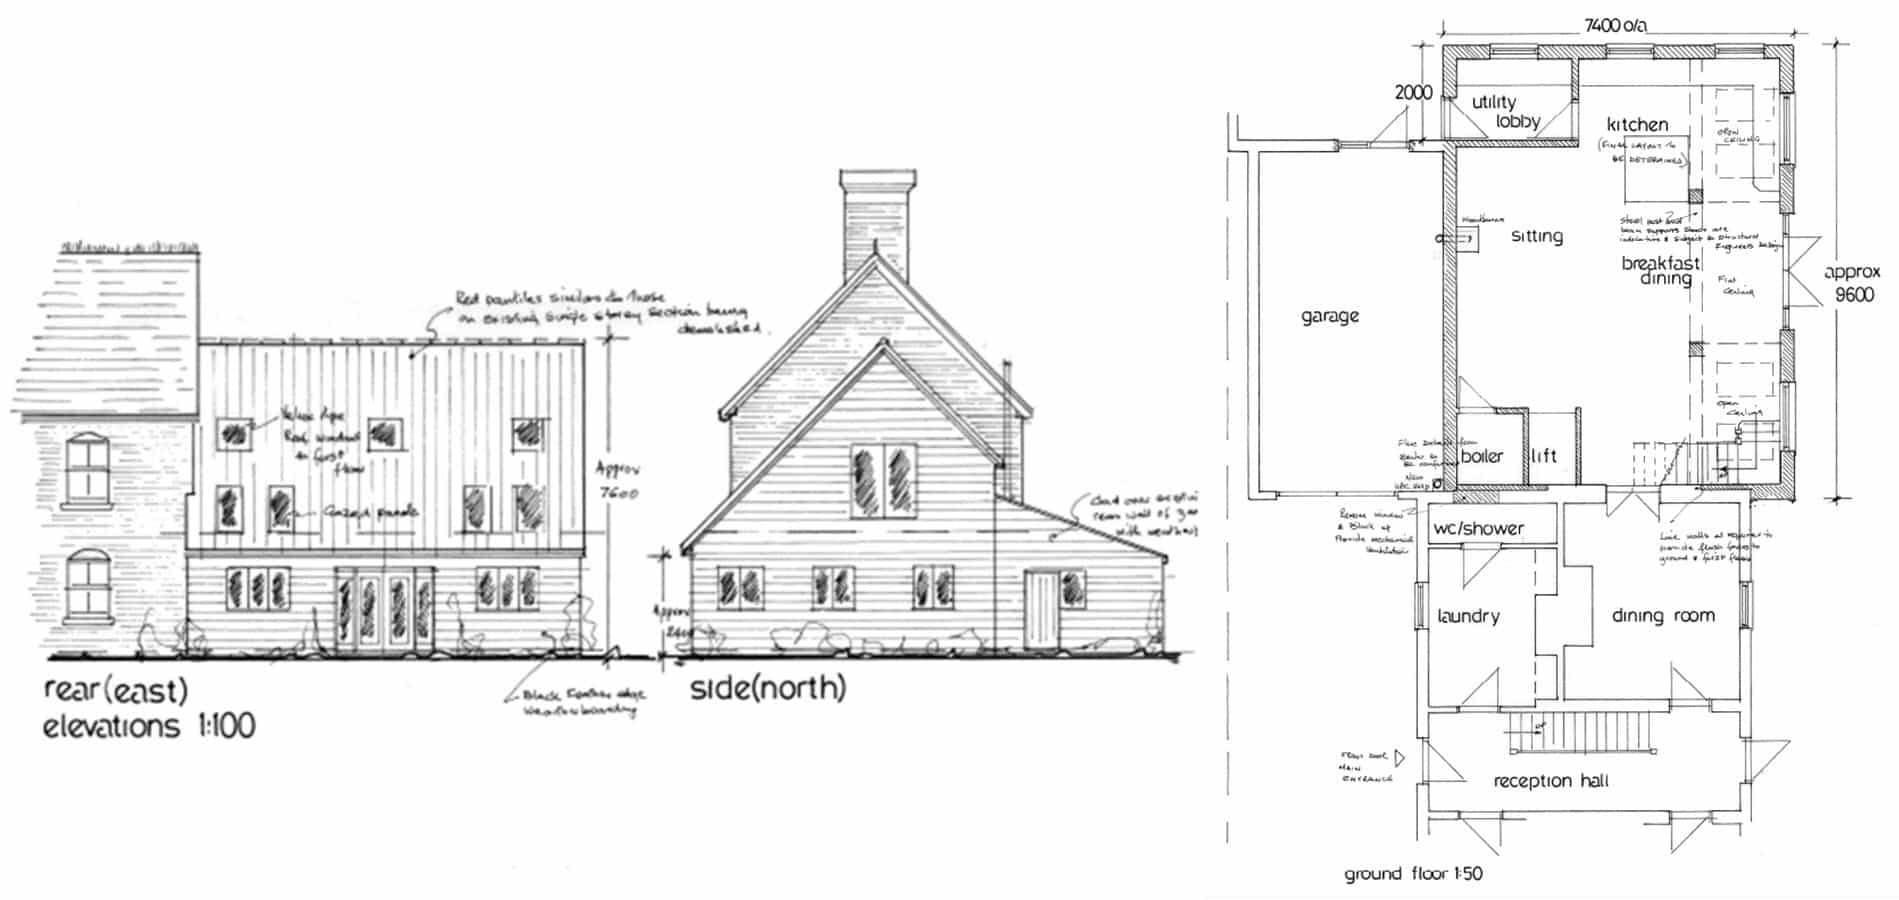 Plans & drawings for house building services